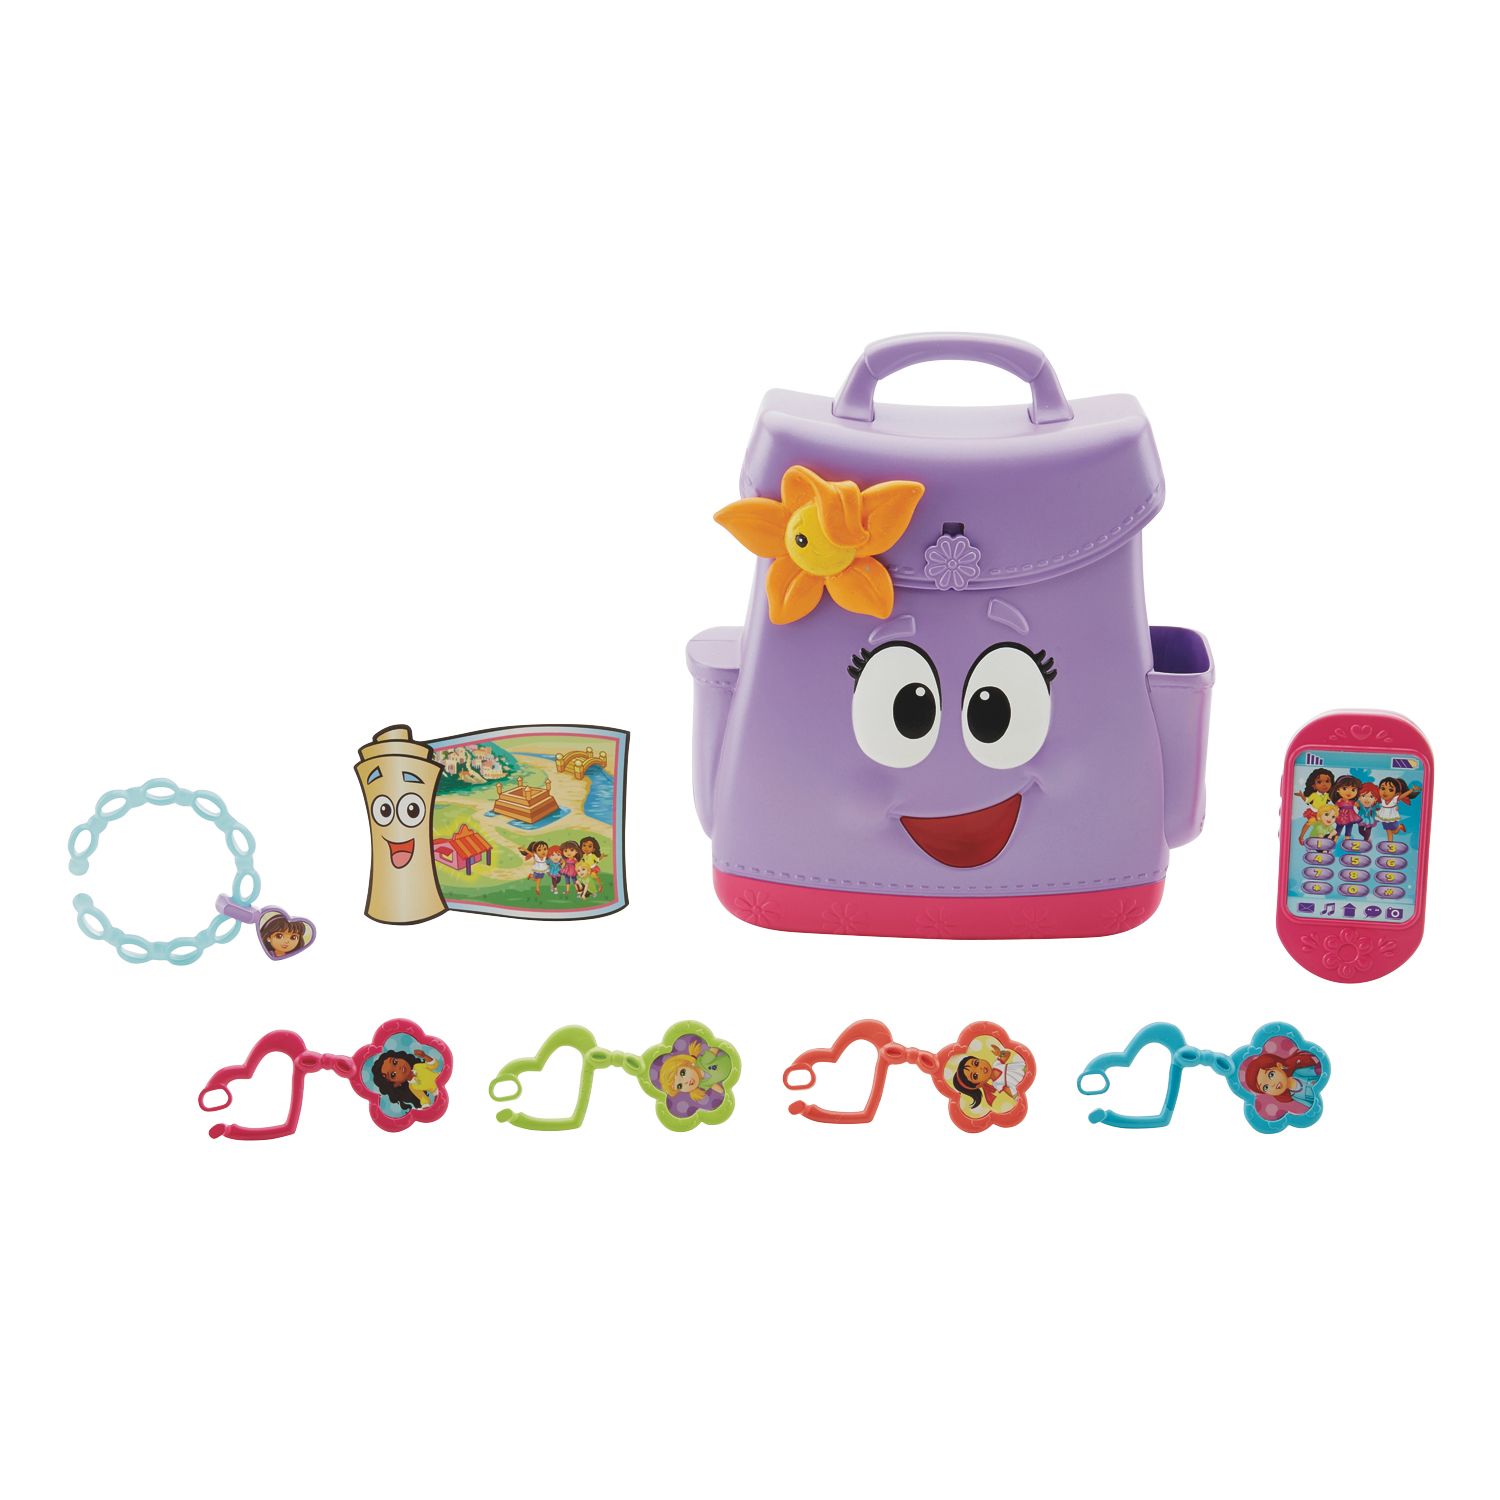 dora and friends toys